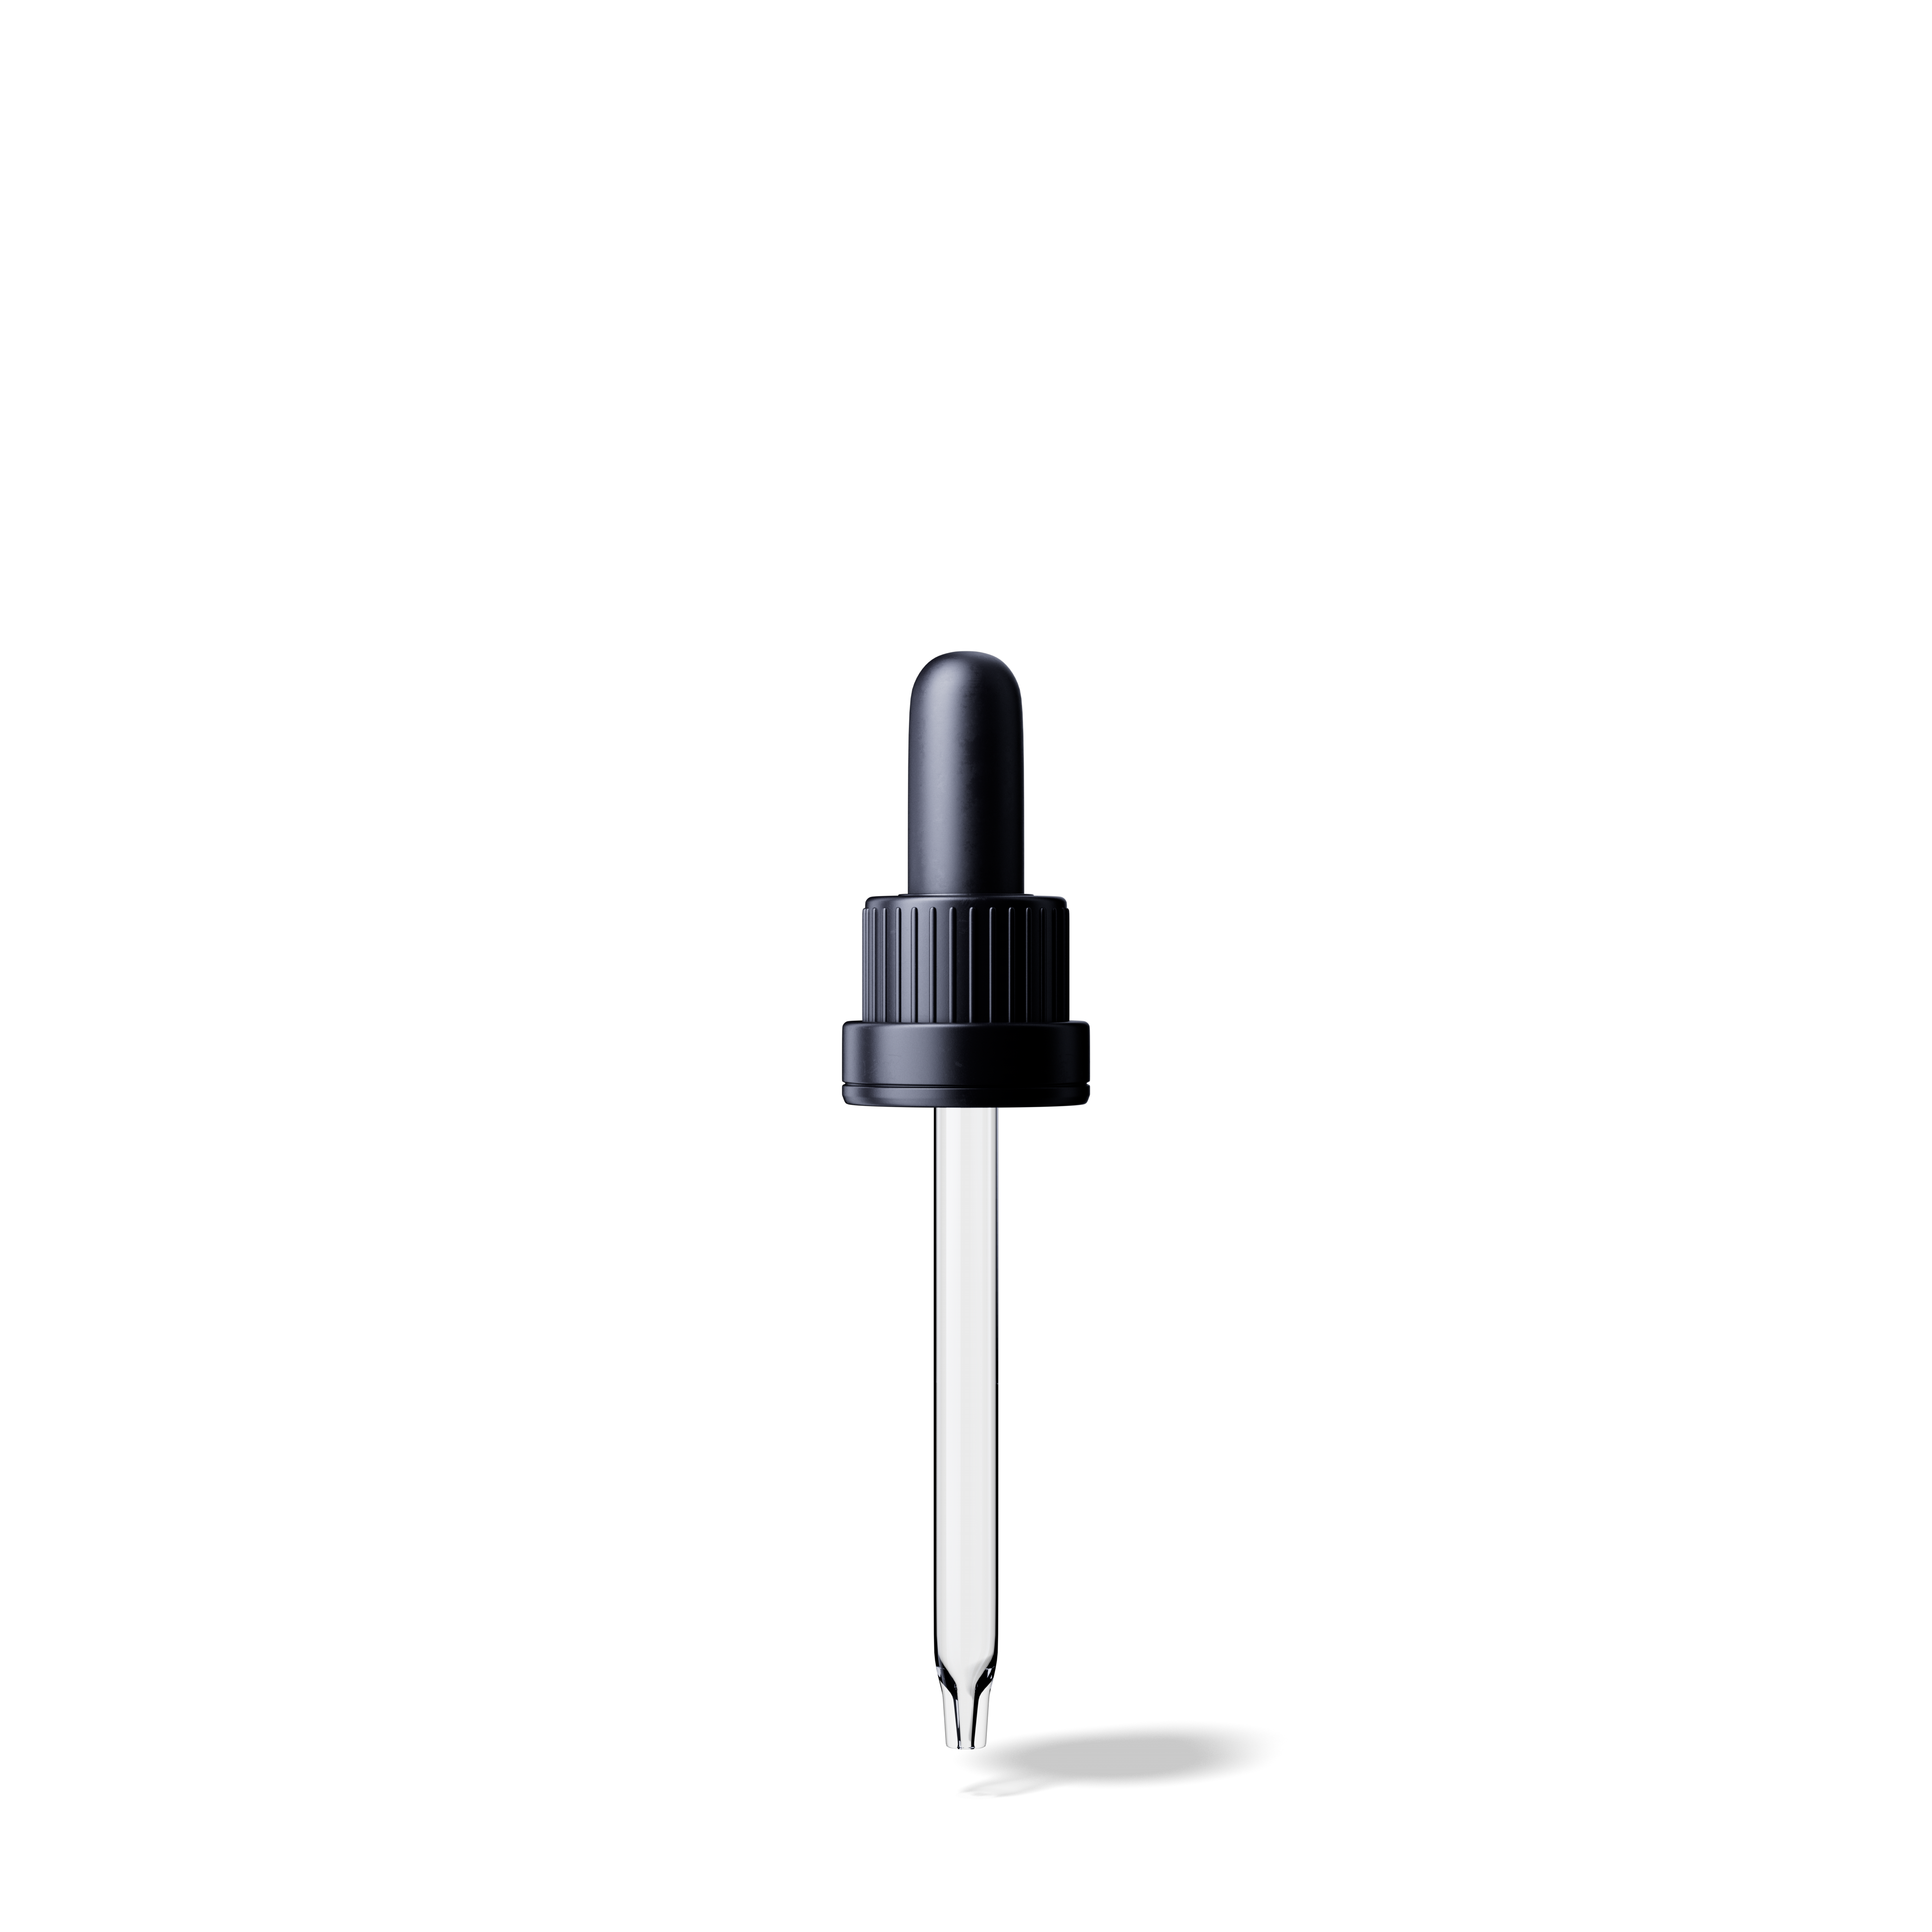 Pipette tamper evident DIN18, III, black, ribbed, bulb TPE, dose 1.0ml, conical tip (Orion 30)